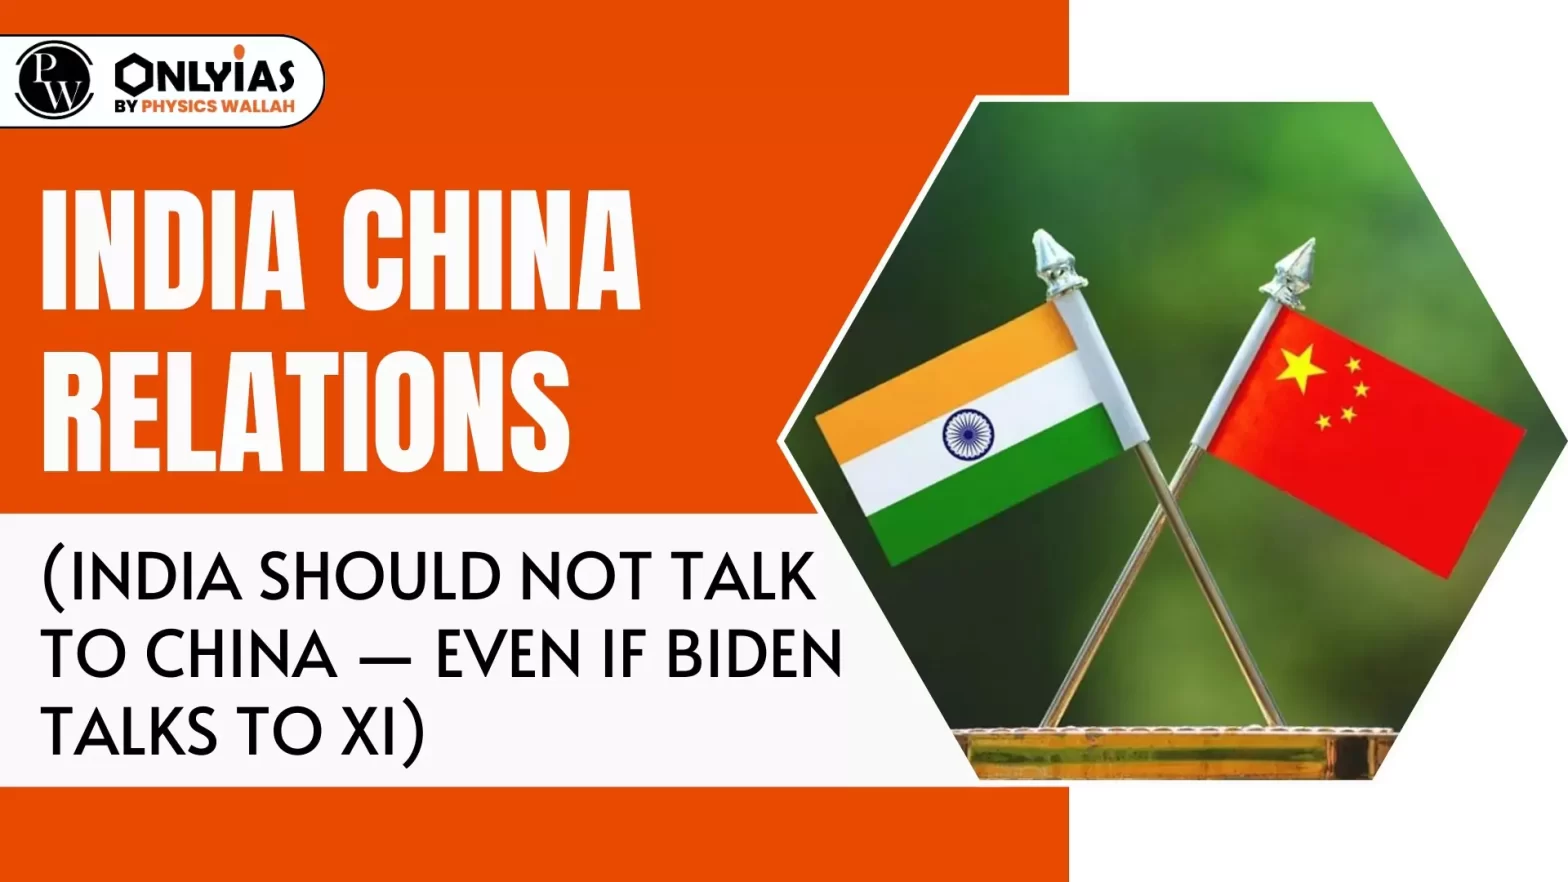 India China Relations (India Should Not Talk To China — Even If Biden Talks To Xi)